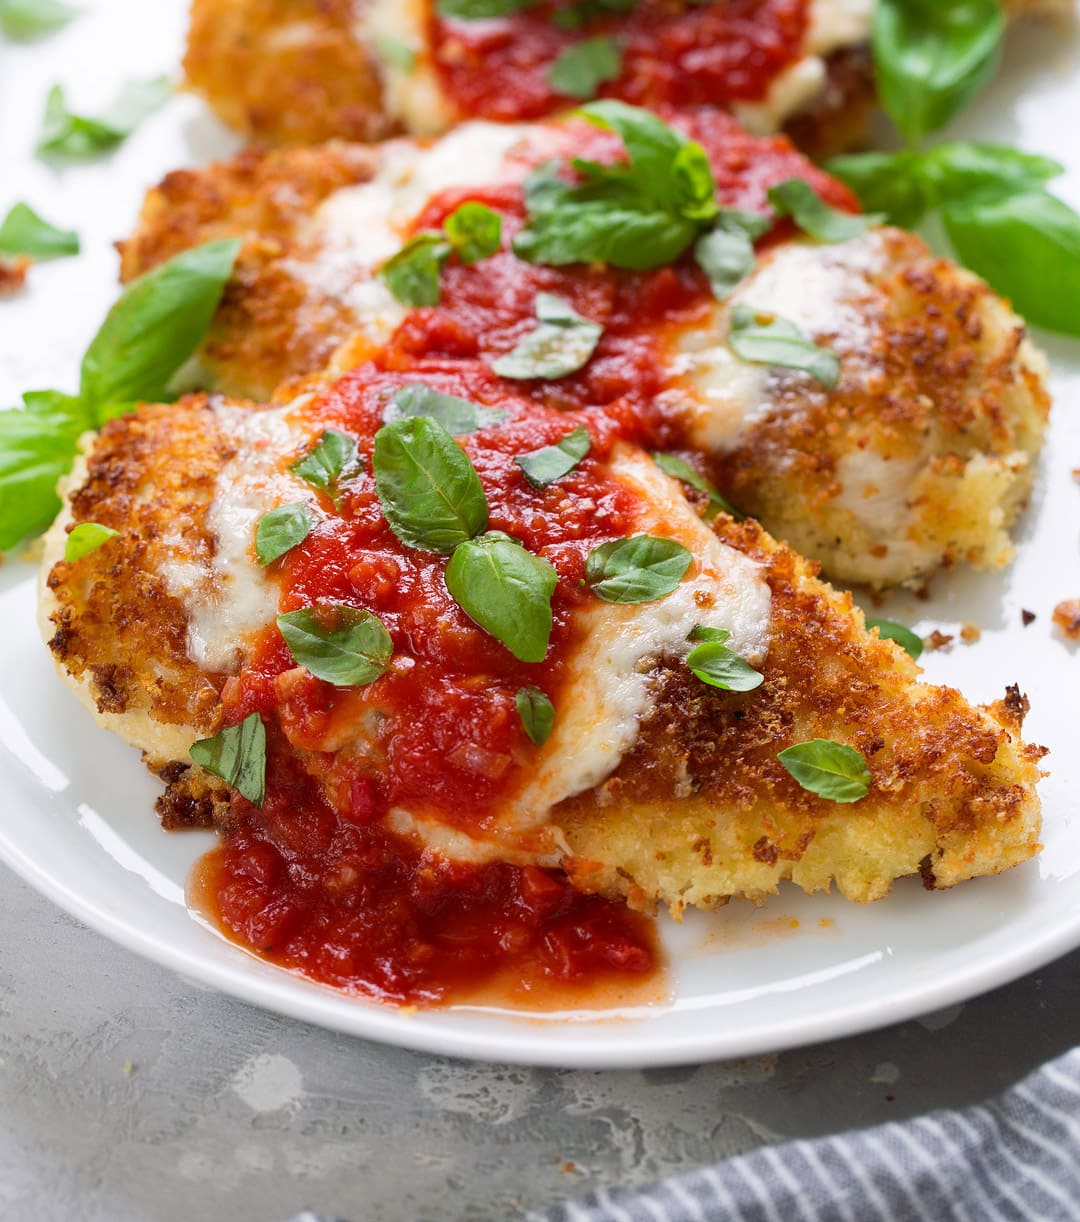 Chicken Parmesan Recipe The Best Cooking Classy,Weber Spirit Sp 320 Gas Grill Manual